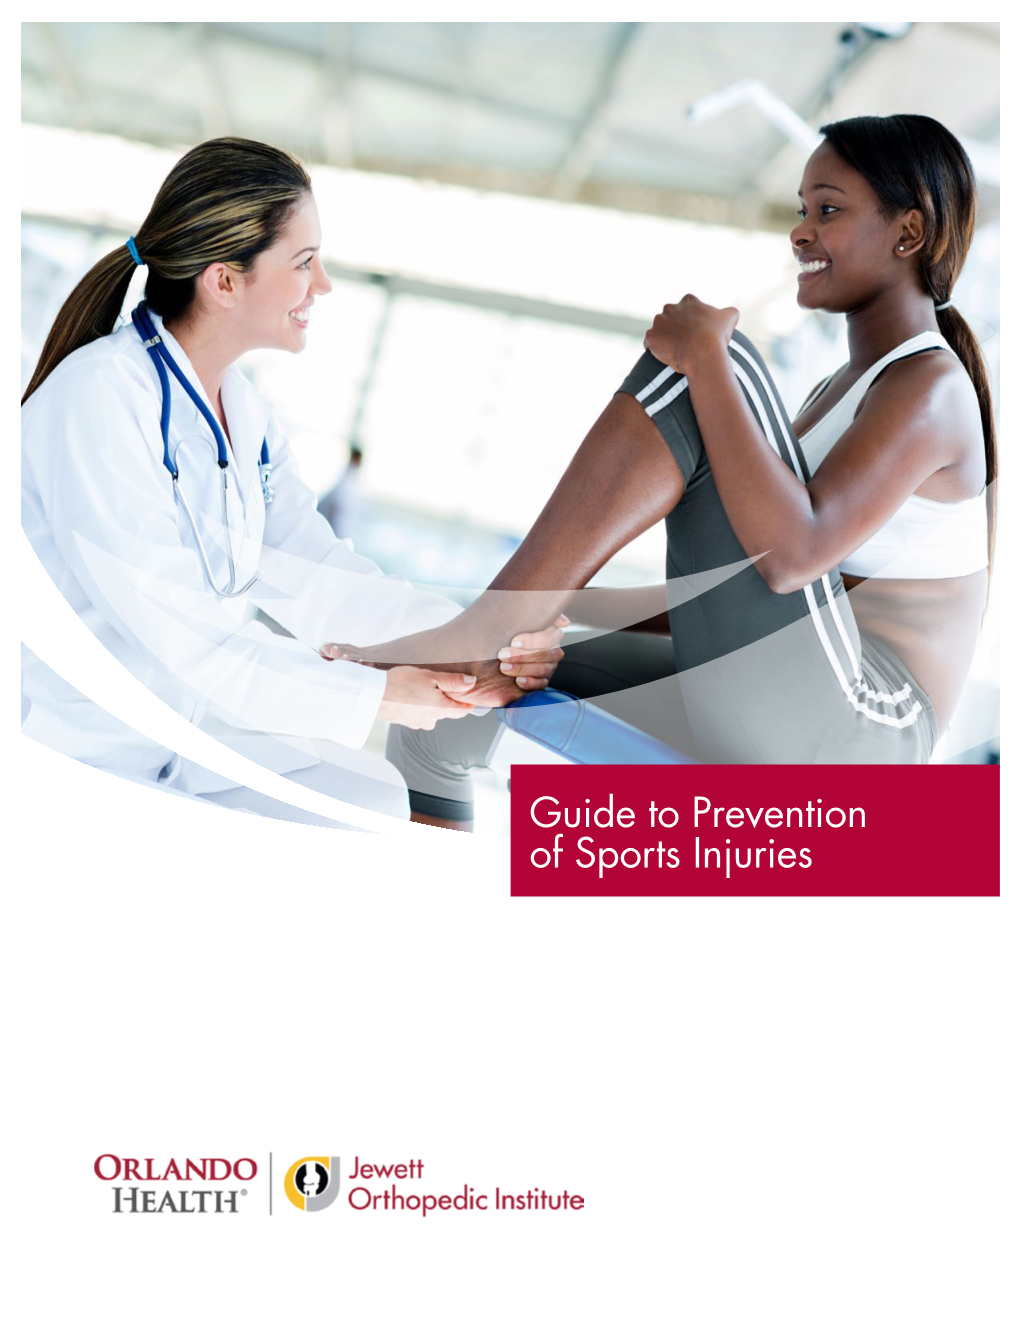 Guide to Prevention of Sports Injuries Guide to Prevention of Sports Injuries